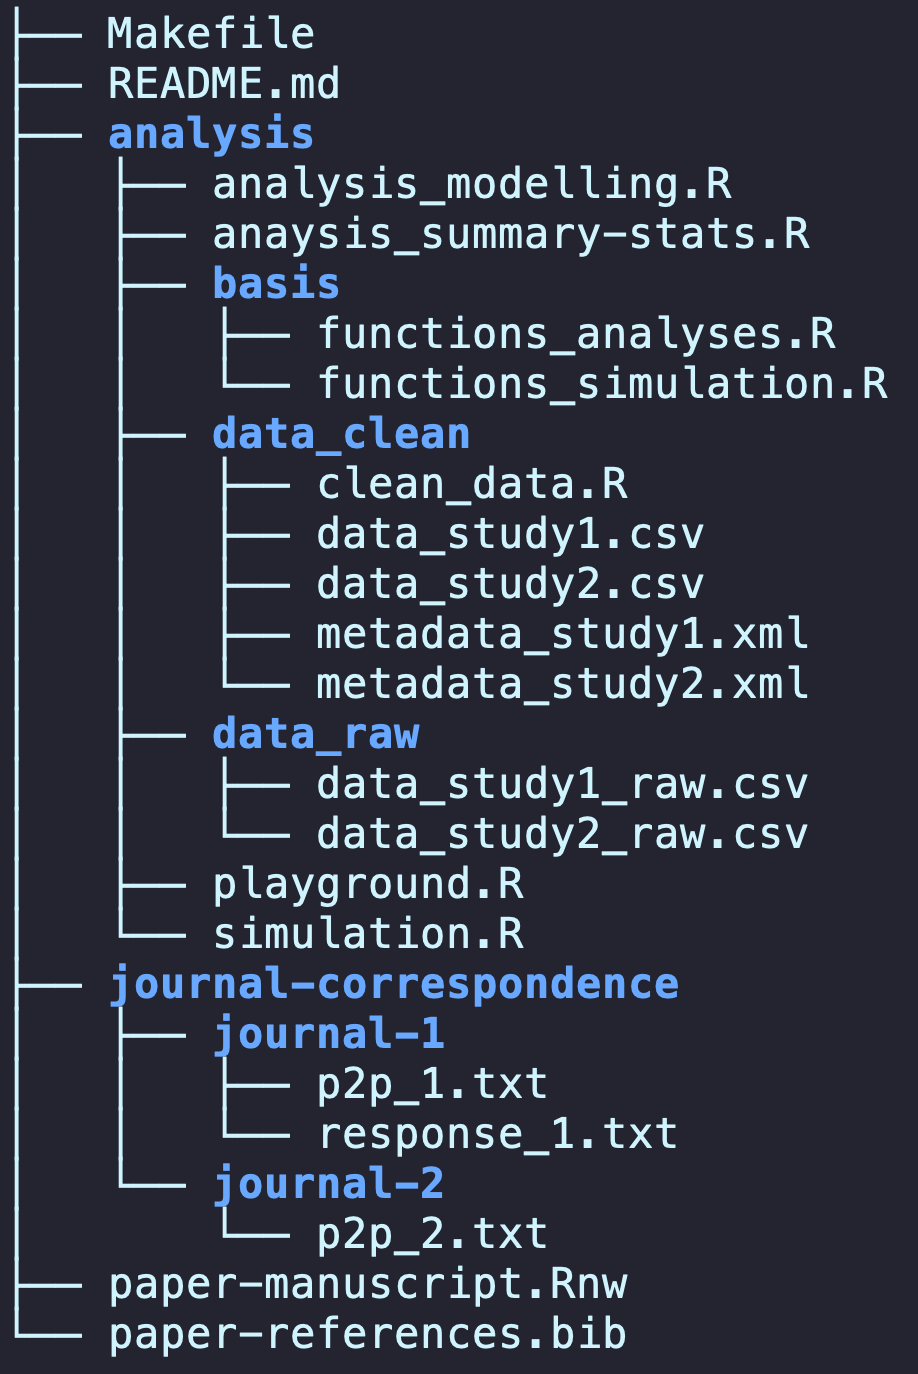 ├── Makefile ├── README.md ├── analysis │   ├── analysis_modelling.R │   ├── anaysis_summary-stats.R │   ├── basis │   │   ├── functions_analyses.R │   │   └── functions_simulation.R │   ├── data_clean │   │   ├── clean_data.R │   │   ├── data_study1.csv │   │   ├── data_study2.csv │   │   ├── metadata_study1.xml │   │   └── metadata_study2.xml │   ├── data_raw │   │   ├── data_study1_raw.csv │   │   └── data_study2_raw.csv │   ├── playground.R │   └── simulation.R ├── journal-correspondence │   ├── journal-1 │   │   ├── p2p_1.txt │   │   └── response_1.txt │   └── journal-2 │       └── p2p_2.txt ├── paper-manuscript.Rnw └── paper-references.bib